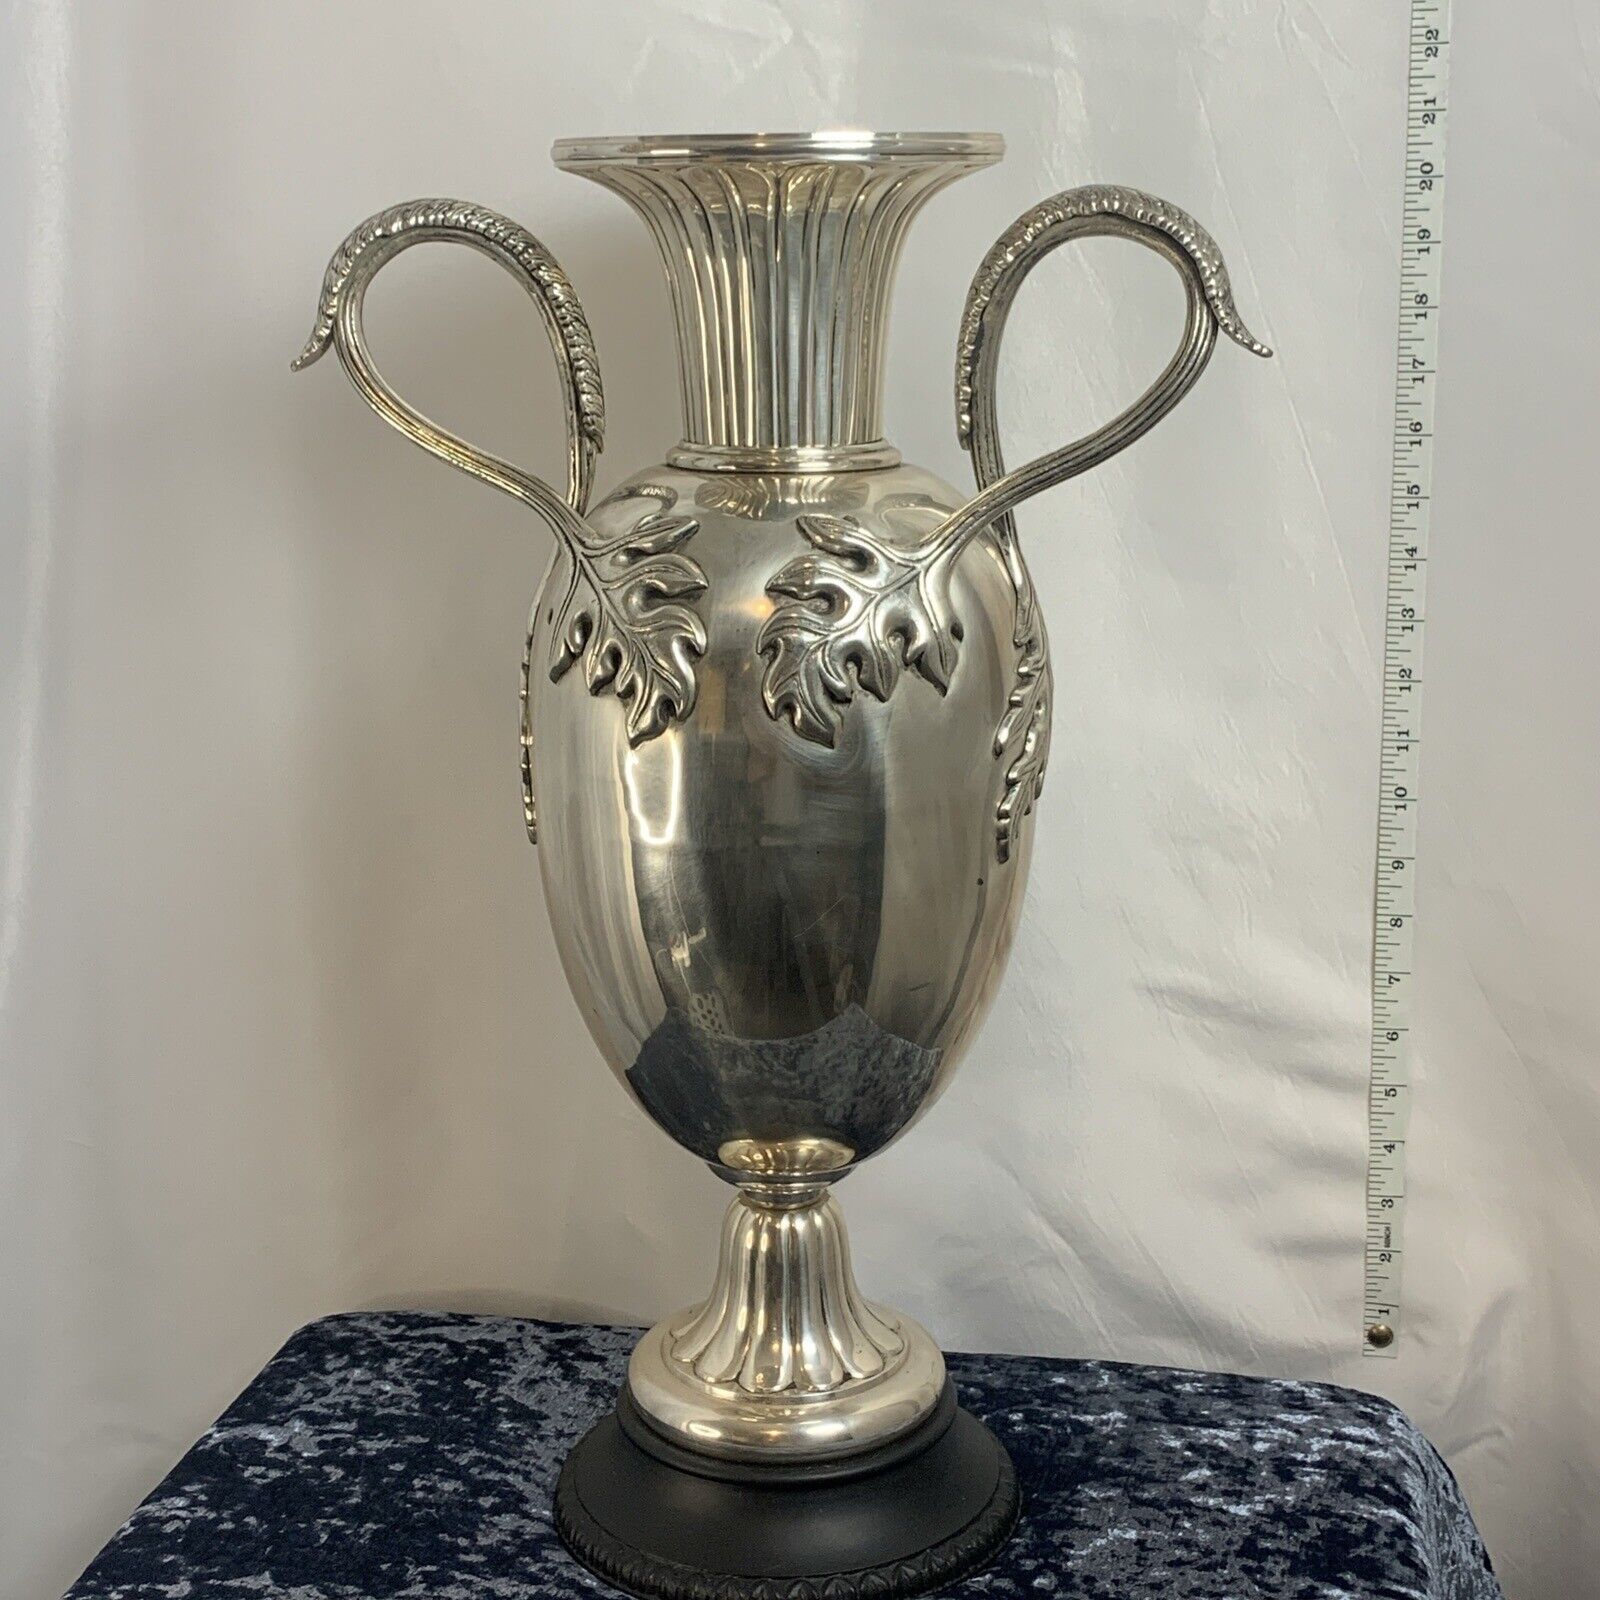 Italian Neoclassical Large Silver Plated Urn on Black Plinth Base. Read More.